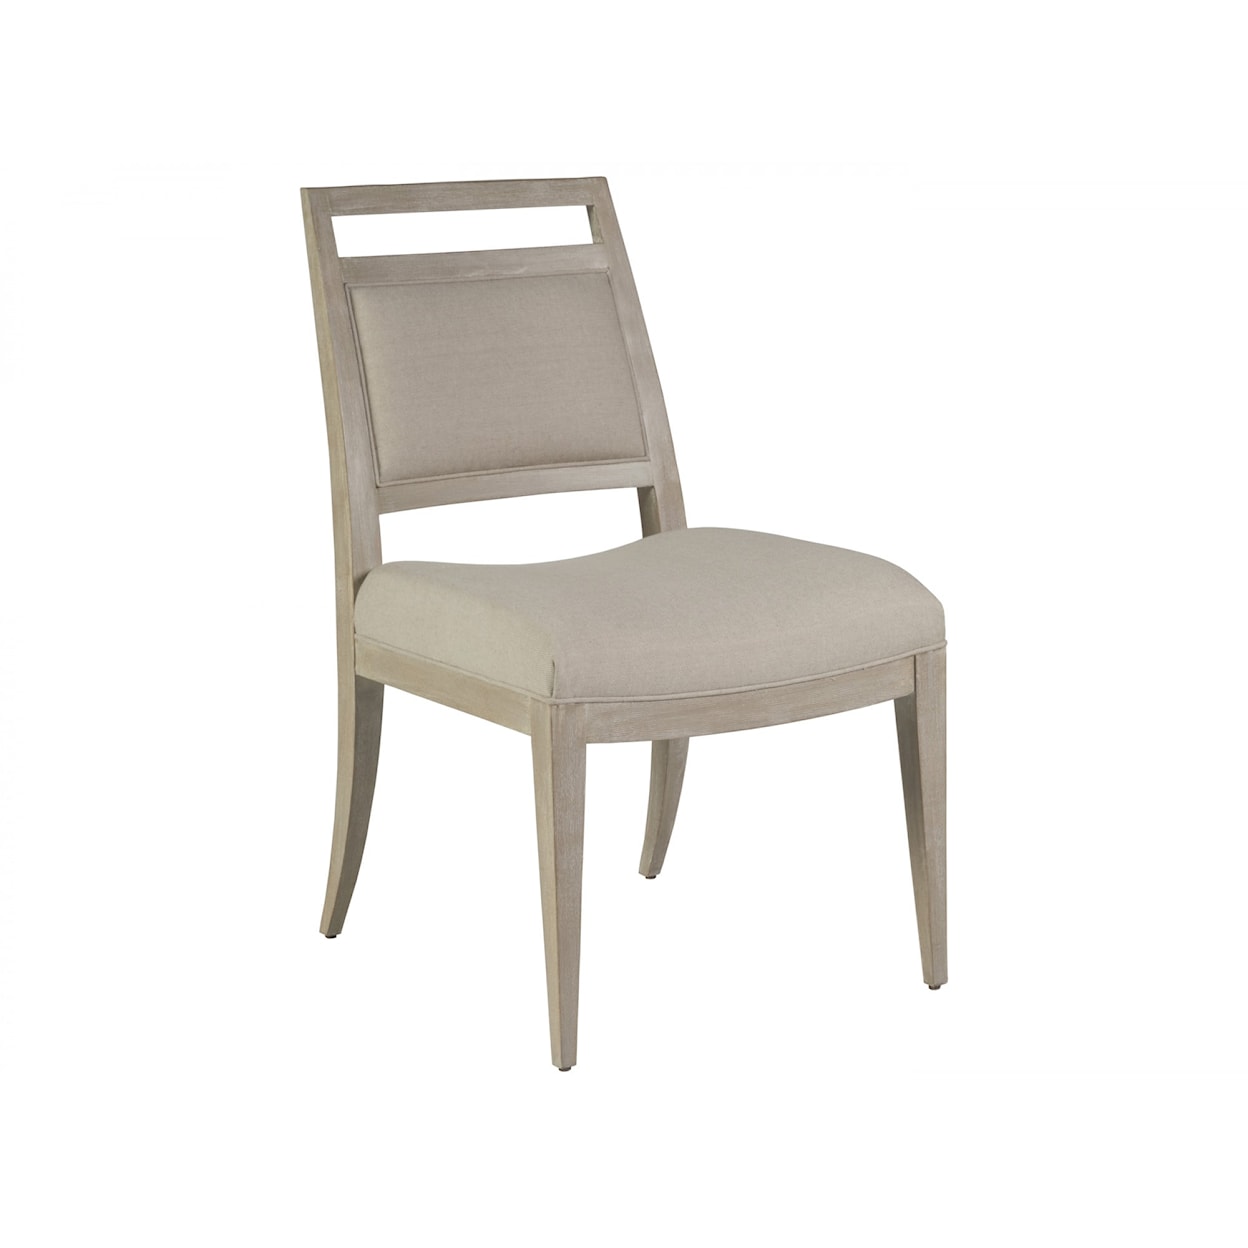 Artistica Cohesion Nico Upholstered Side Chair